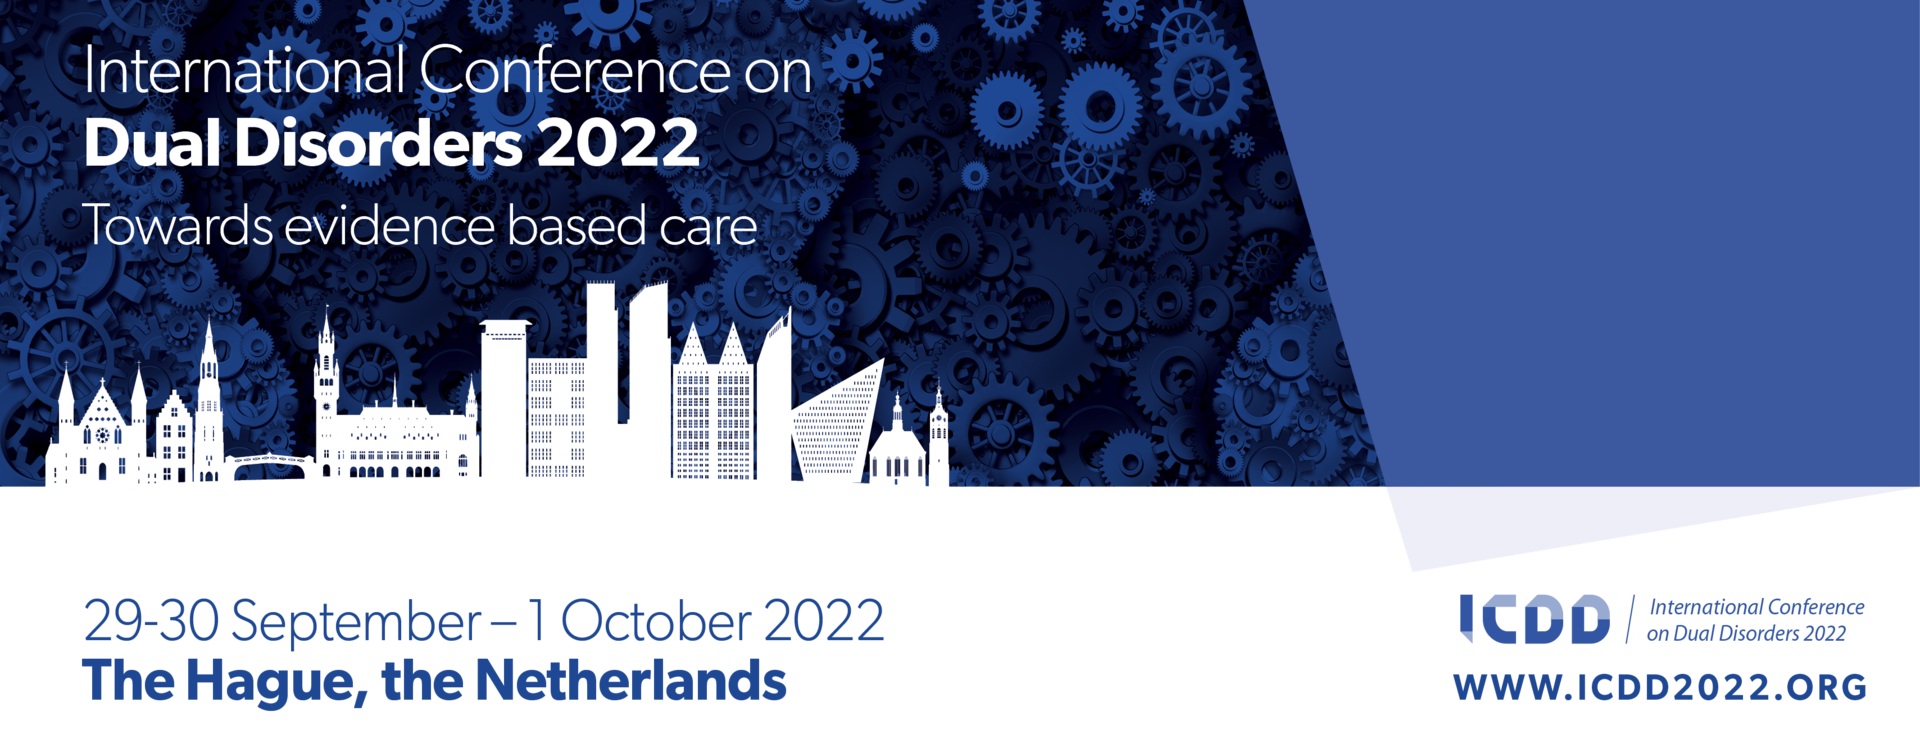 INTERNATIONAL CONFERENCE ON DUAL DISORDERS 2022 - ICDD2022, Den Haag, Zuid-Holland, Netherlands